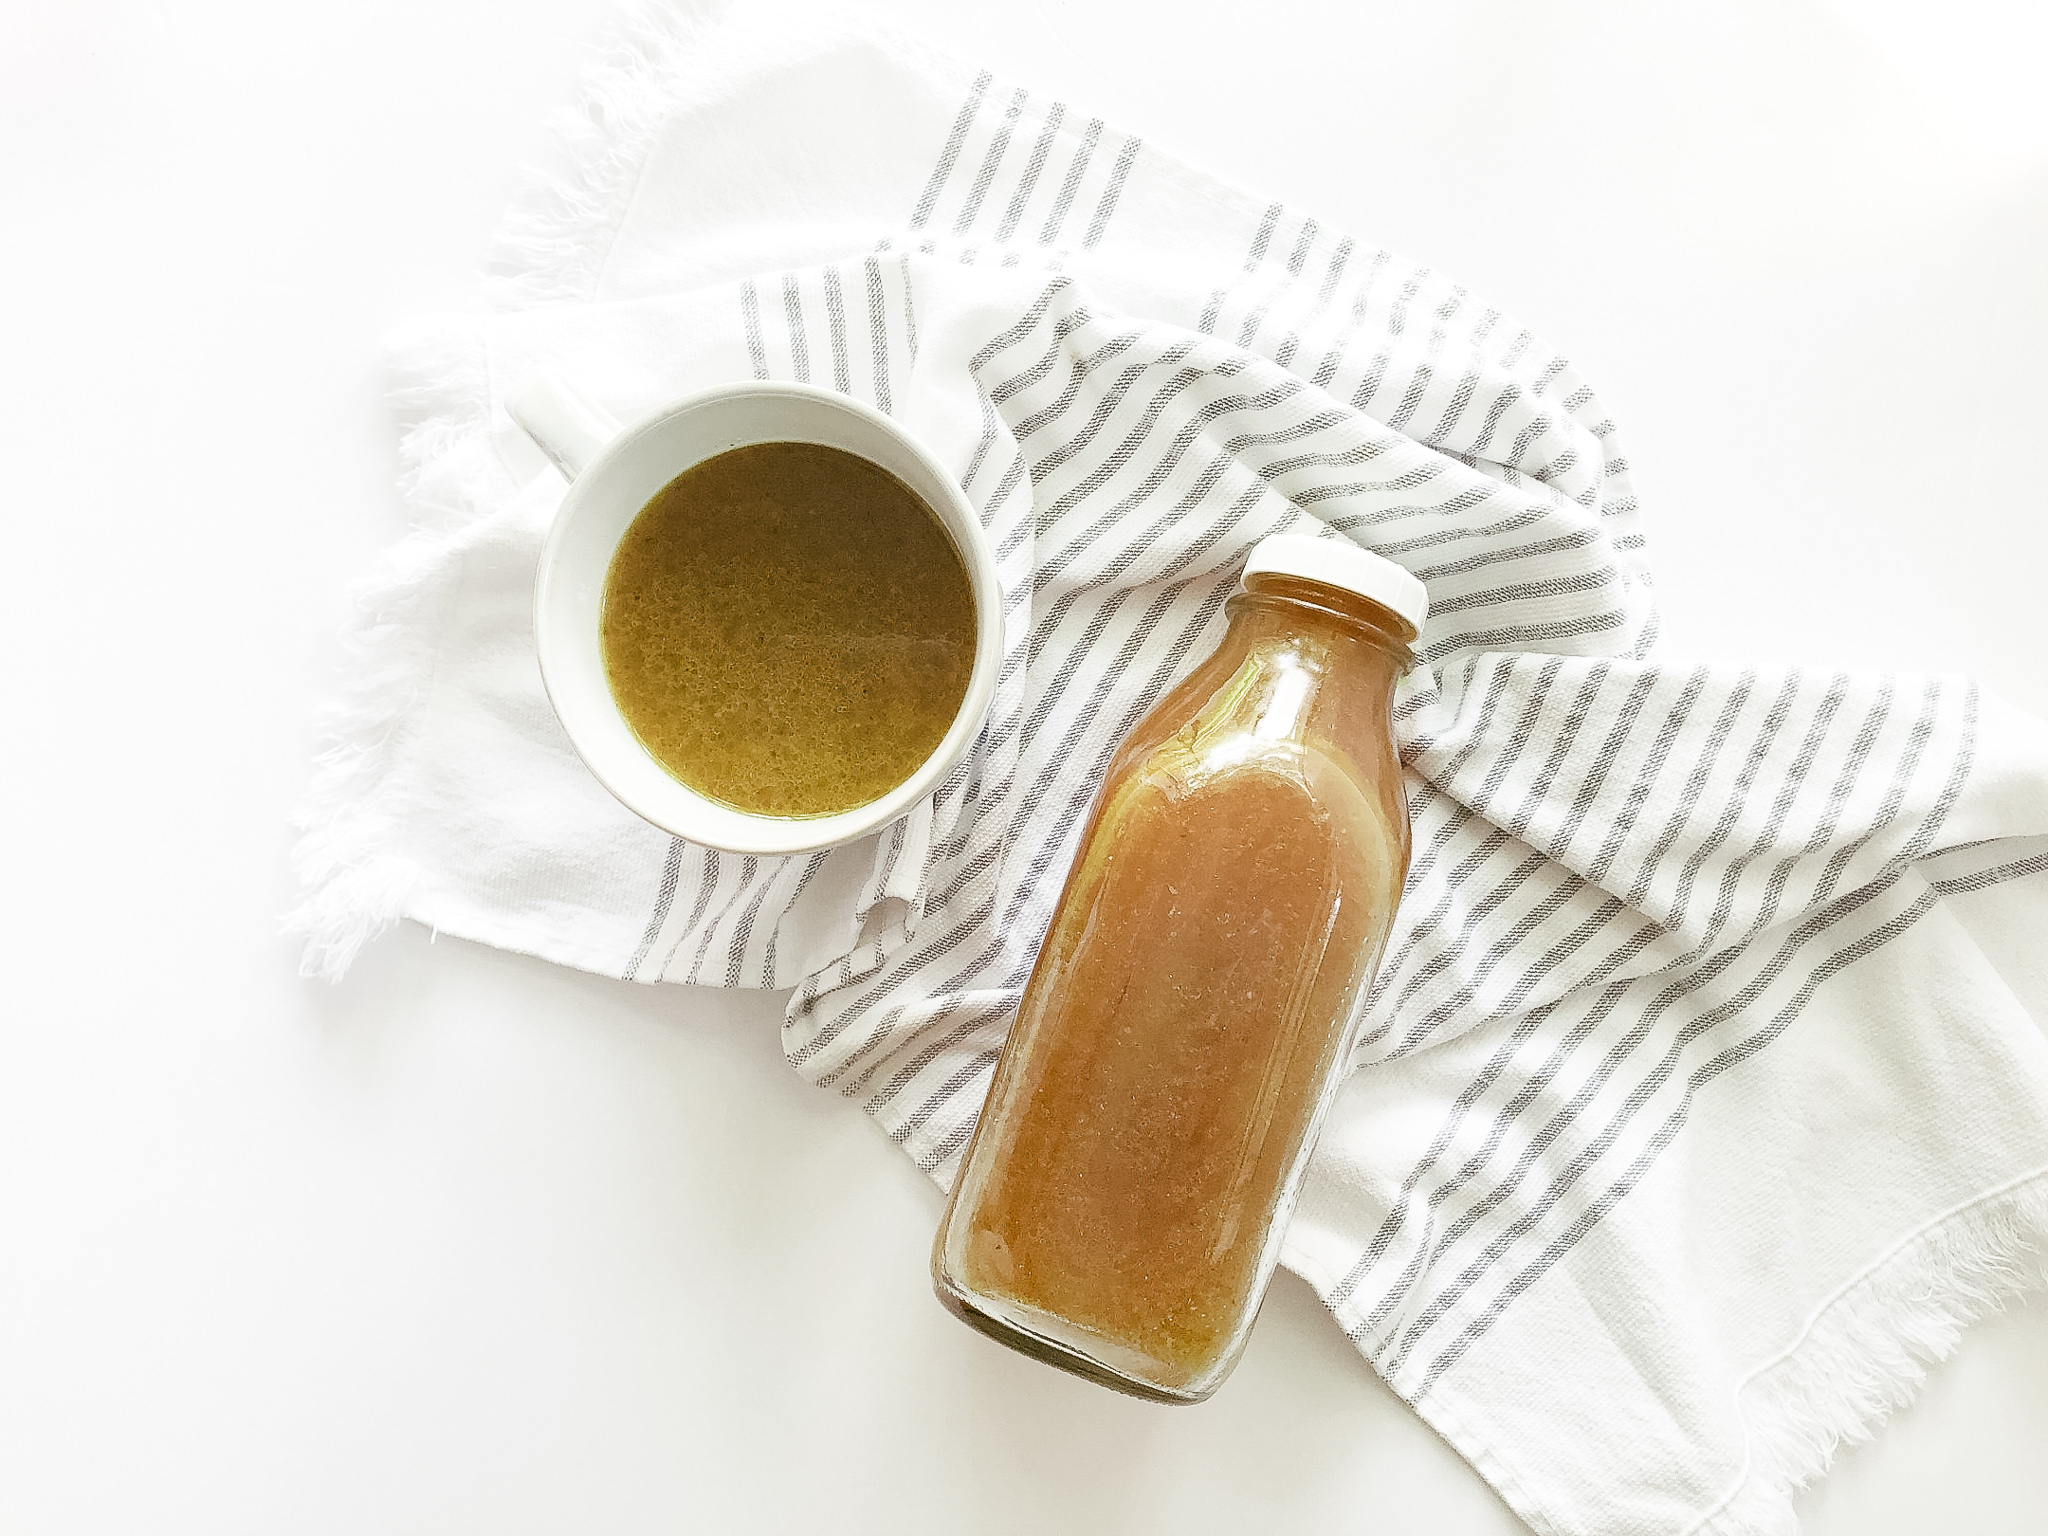 comforting and healing chicken bone broth recipe you can make at home in the crockpot | paleo, whole 30, keto, low carb | collagen benefits to heal leaky gut